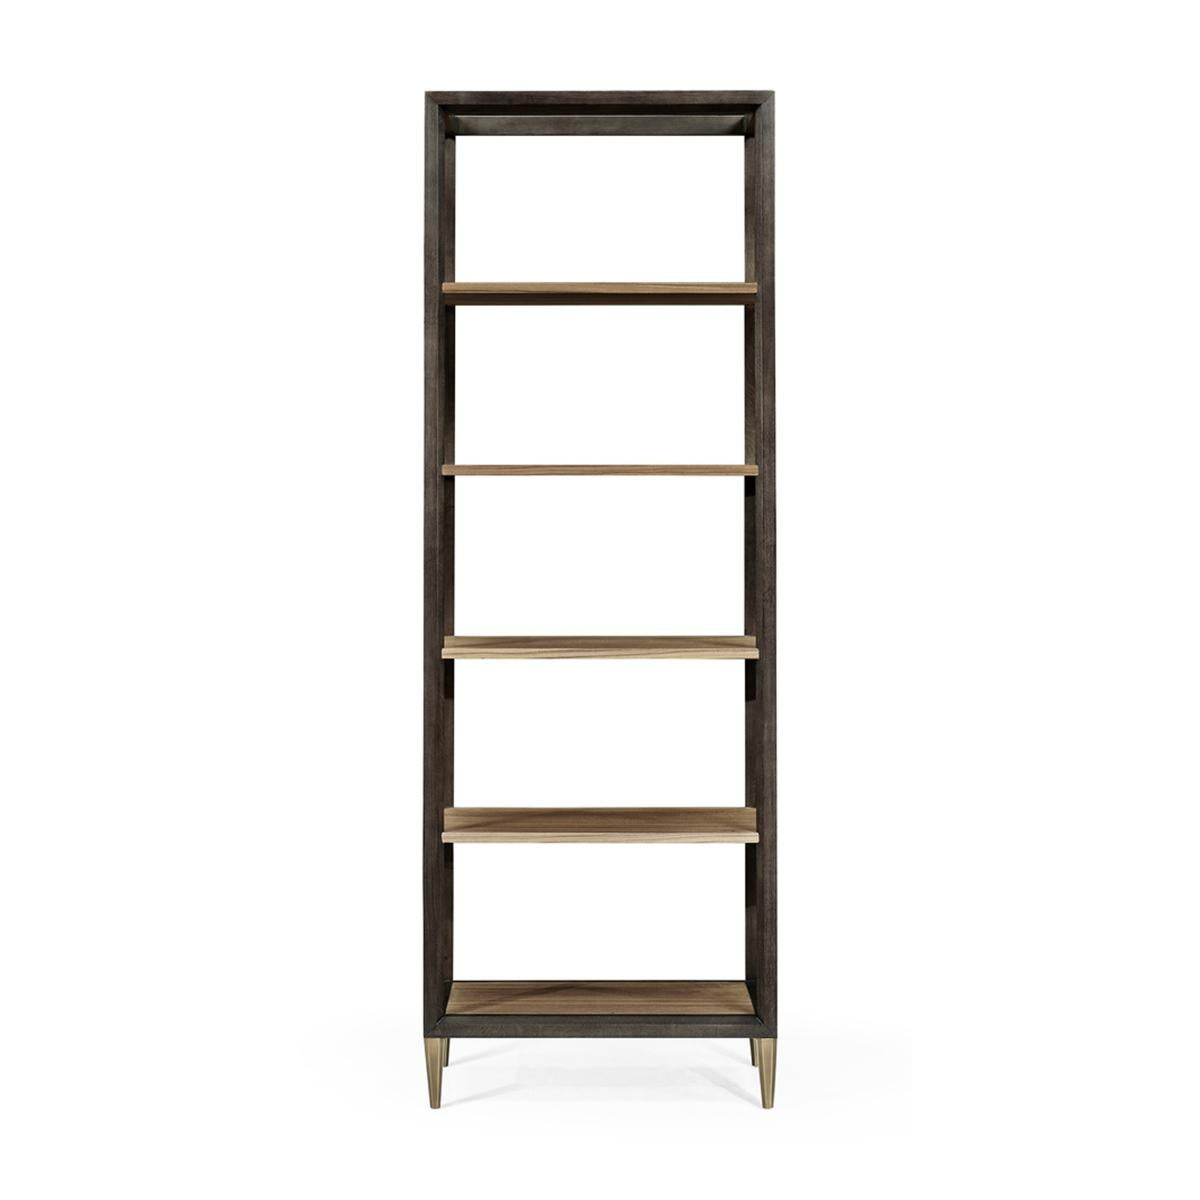 Modern Six Tier Etagere, built from hardwood solids with beveled, ebonized, posts and rails. The shelves feature flat-cut paldao with a light transparent lacquer finish. The feet are brass and are acid-dipped and hand-rubbed to achieve a rich,